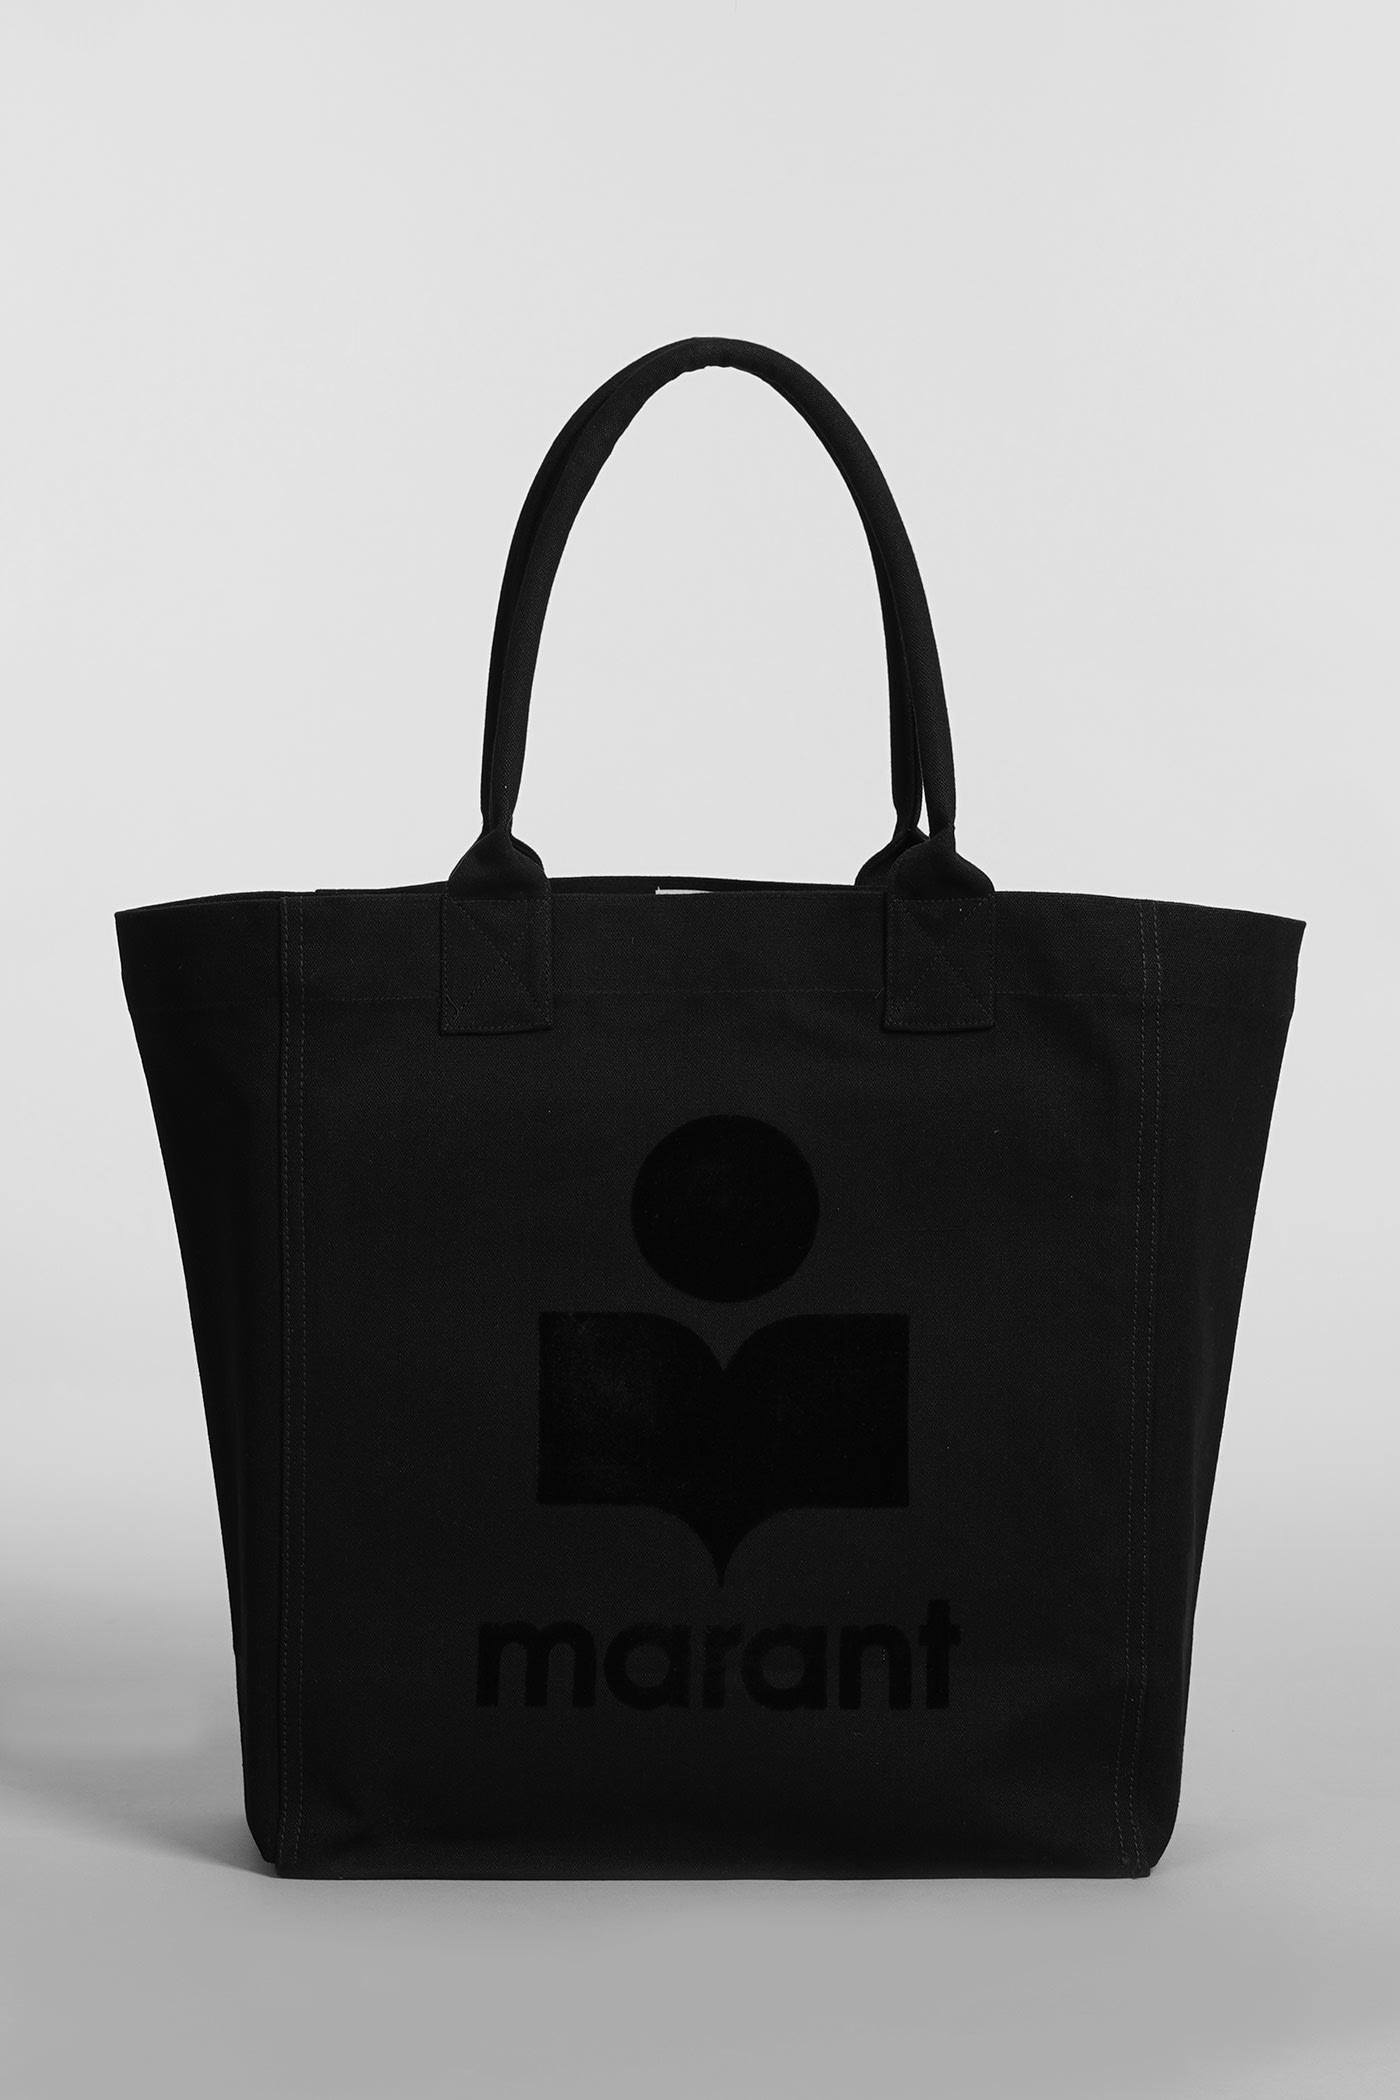 ISABEL MARANT YENKY TOTE IN BLACK COTTON